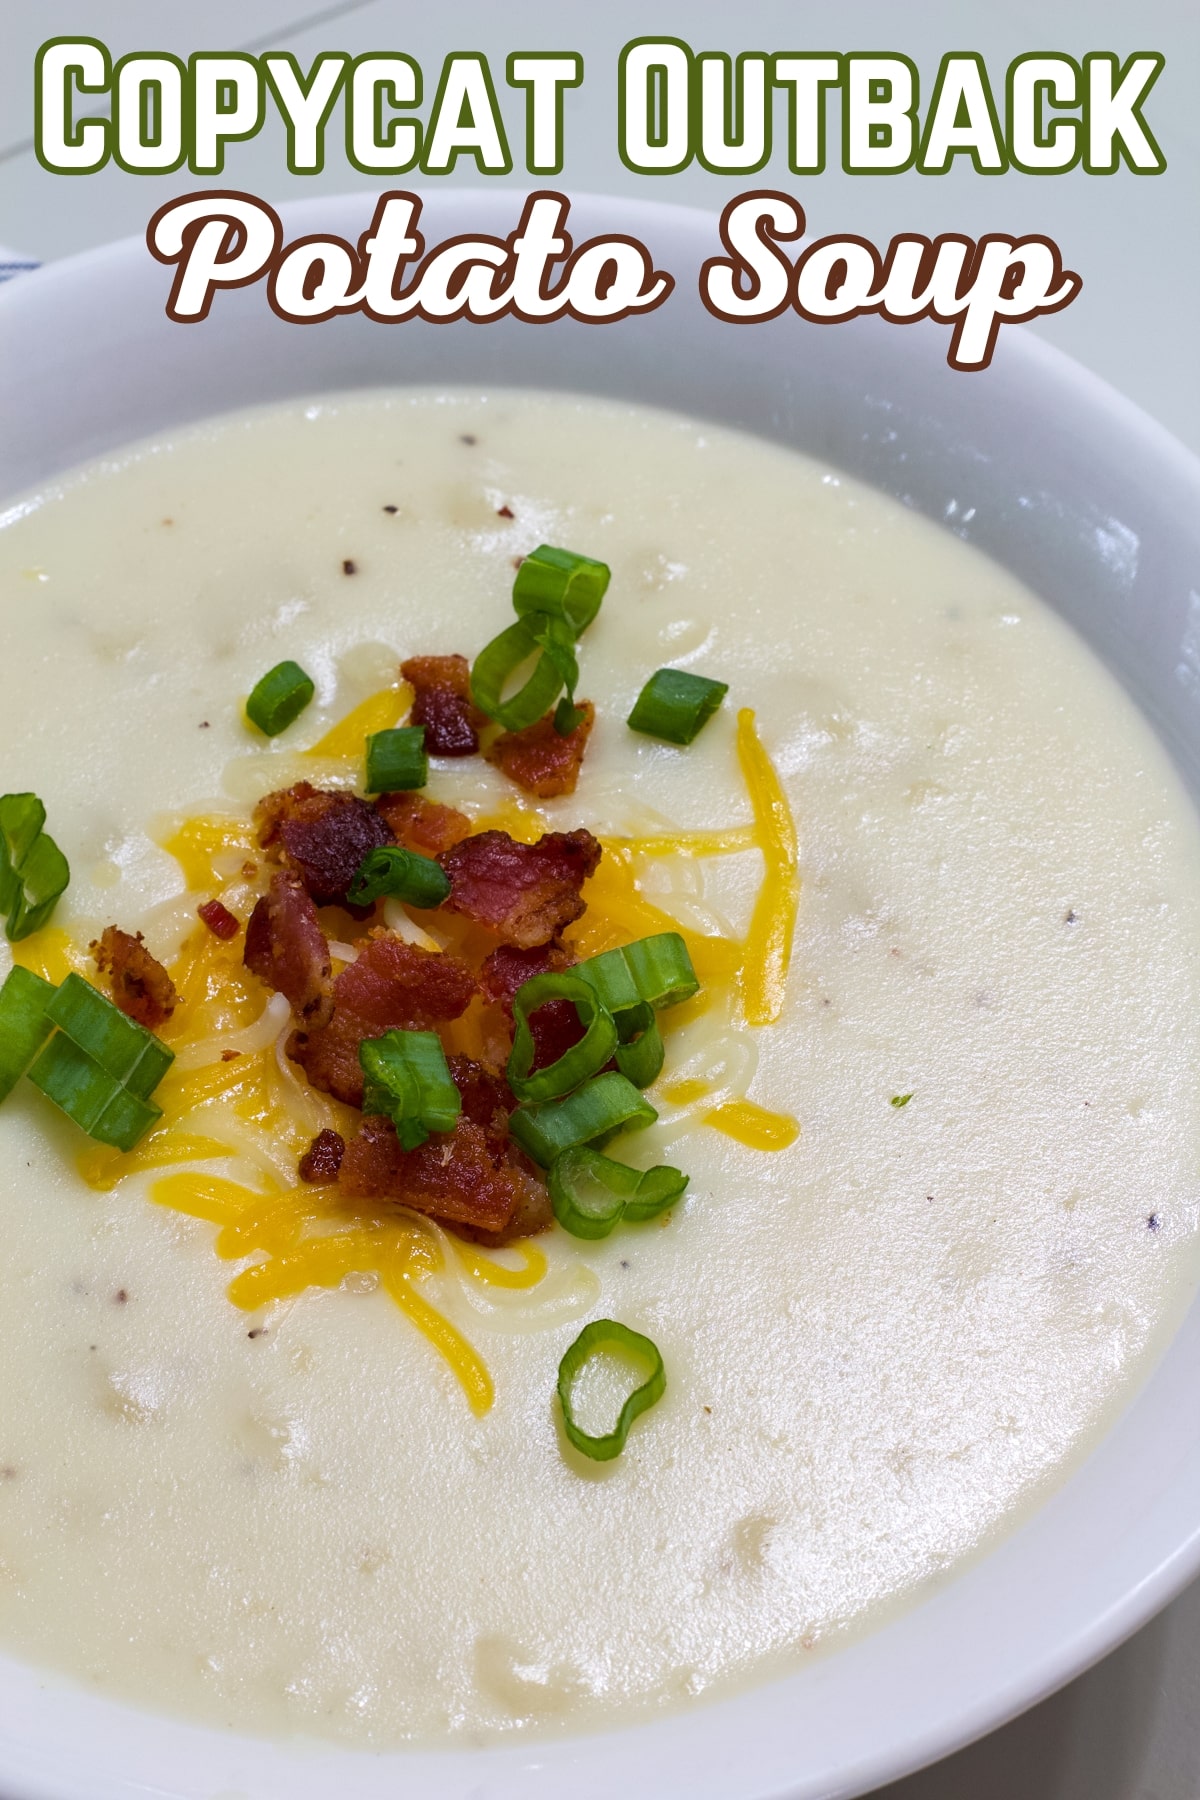 Indulge in the comfort of Outback Steakhouse Potato Soup with our quick 1-pot, 15-min recipe. A hearty bowl of creamy goodness awaits! via @mindyscookingobsession